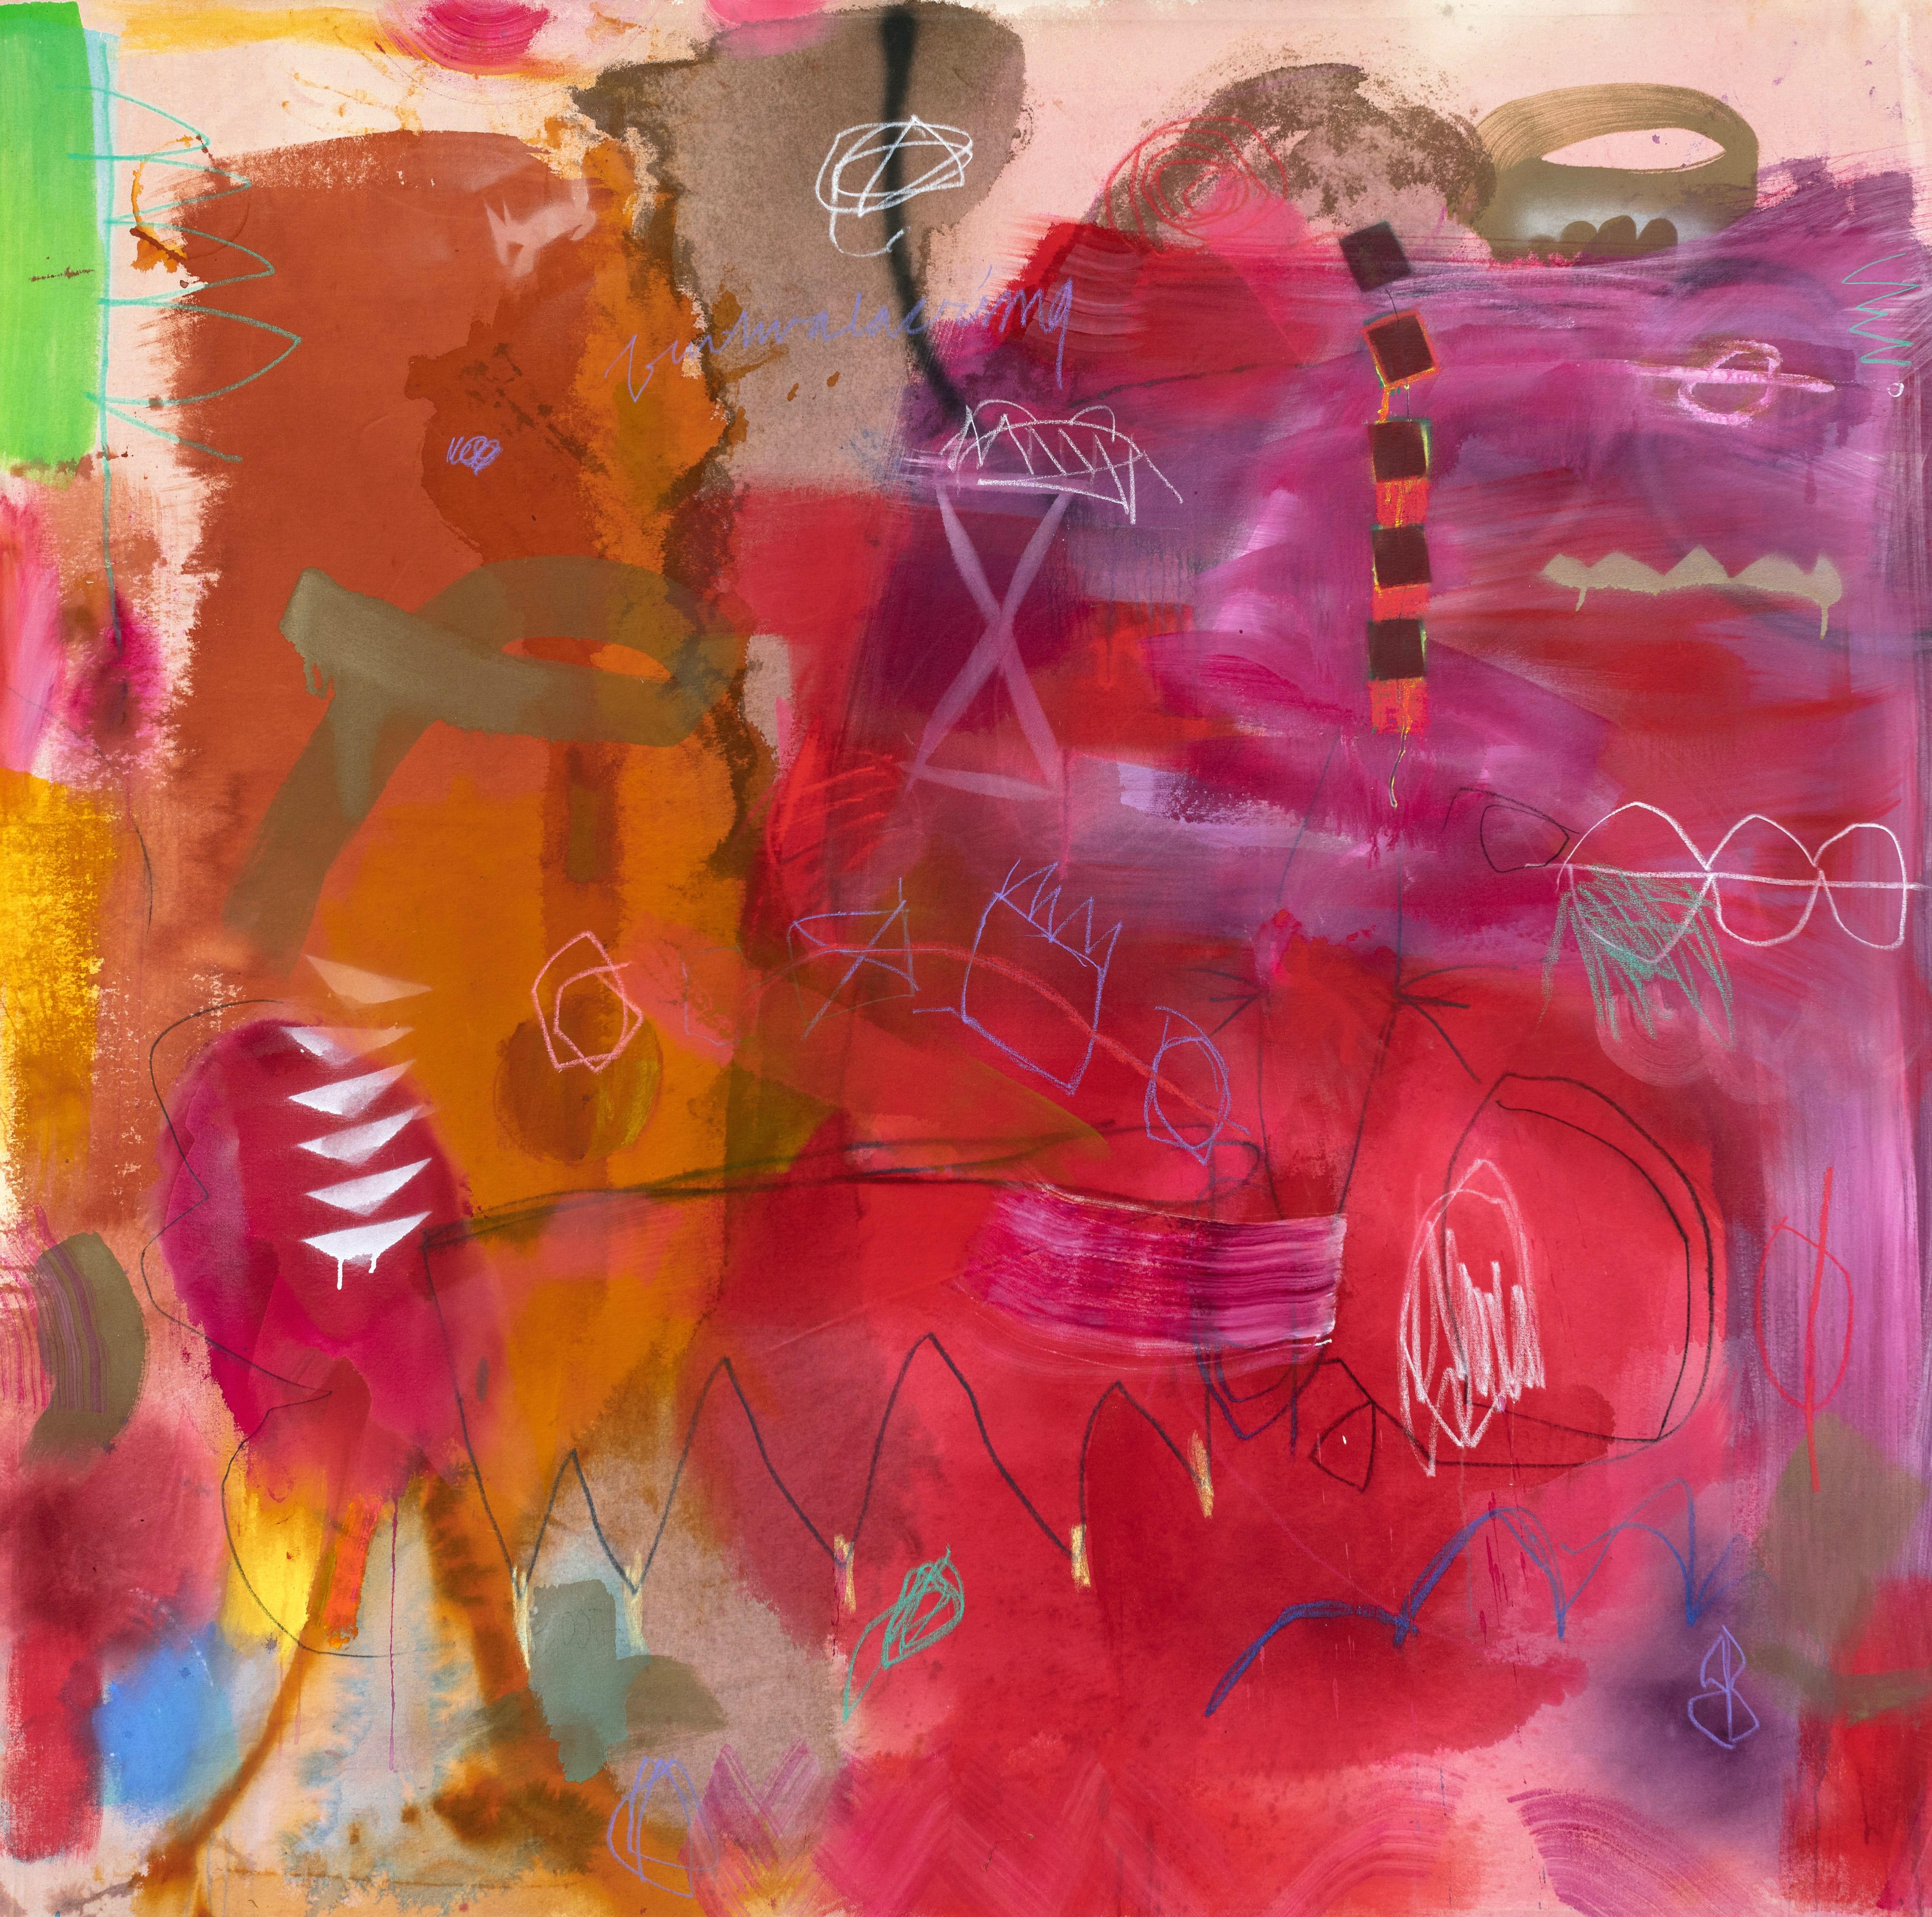 Gestural Abstraction_Pink/Orange/Purple_Mixed Media_Mozambique, Jane Booth 2022